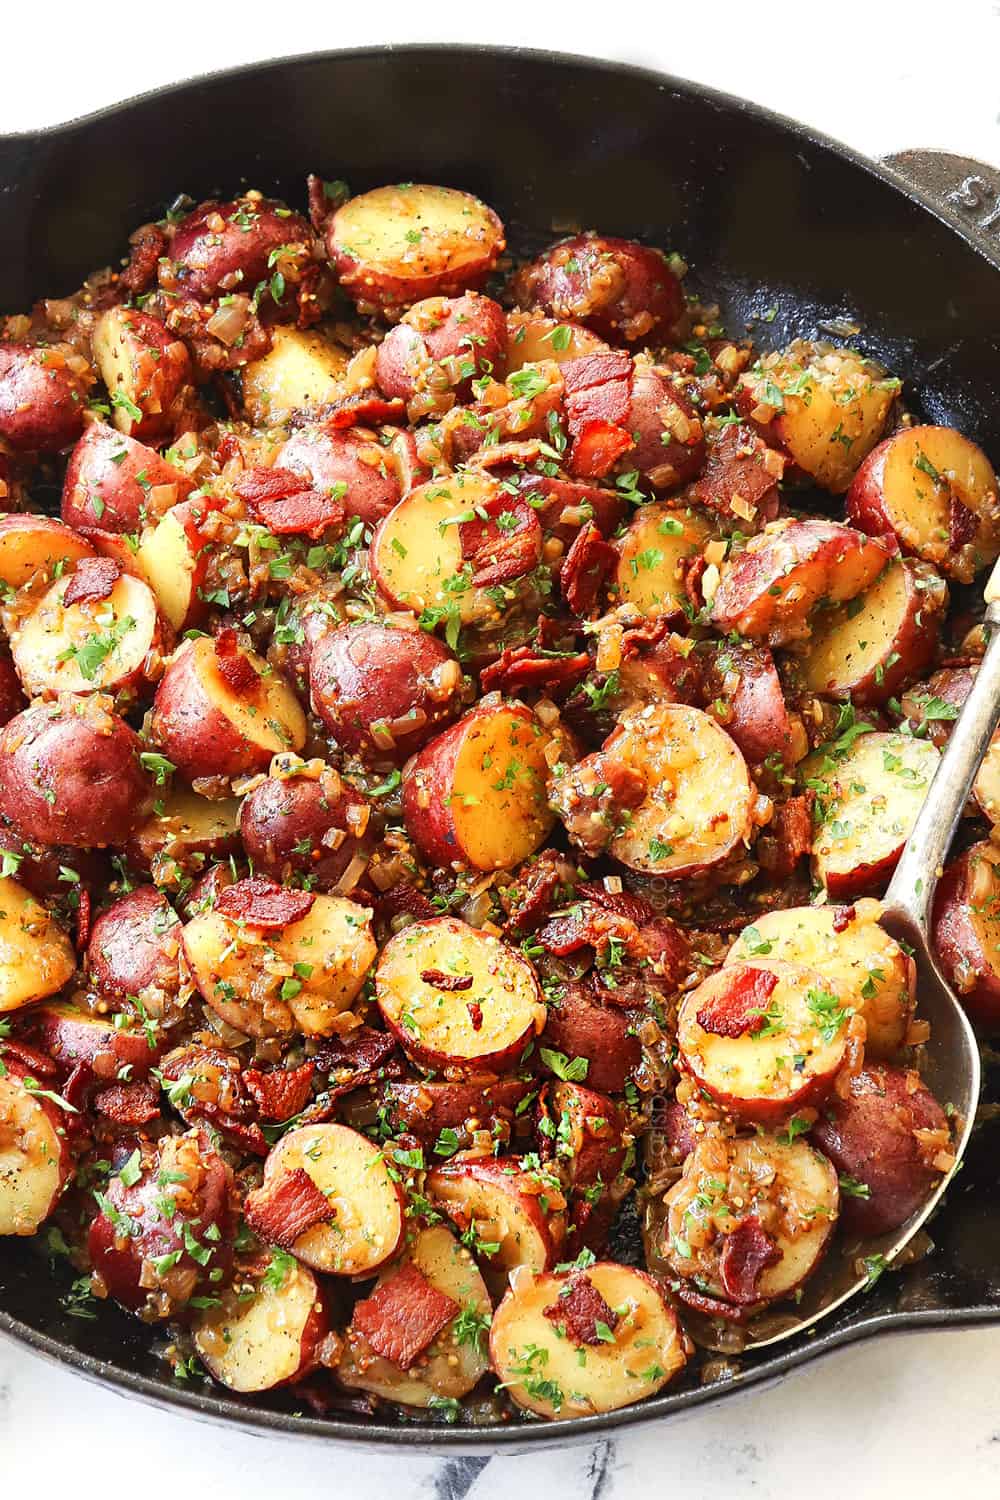 showing how to make German potato salad by tossing the potatoes with the dressing and bacon in a skillet